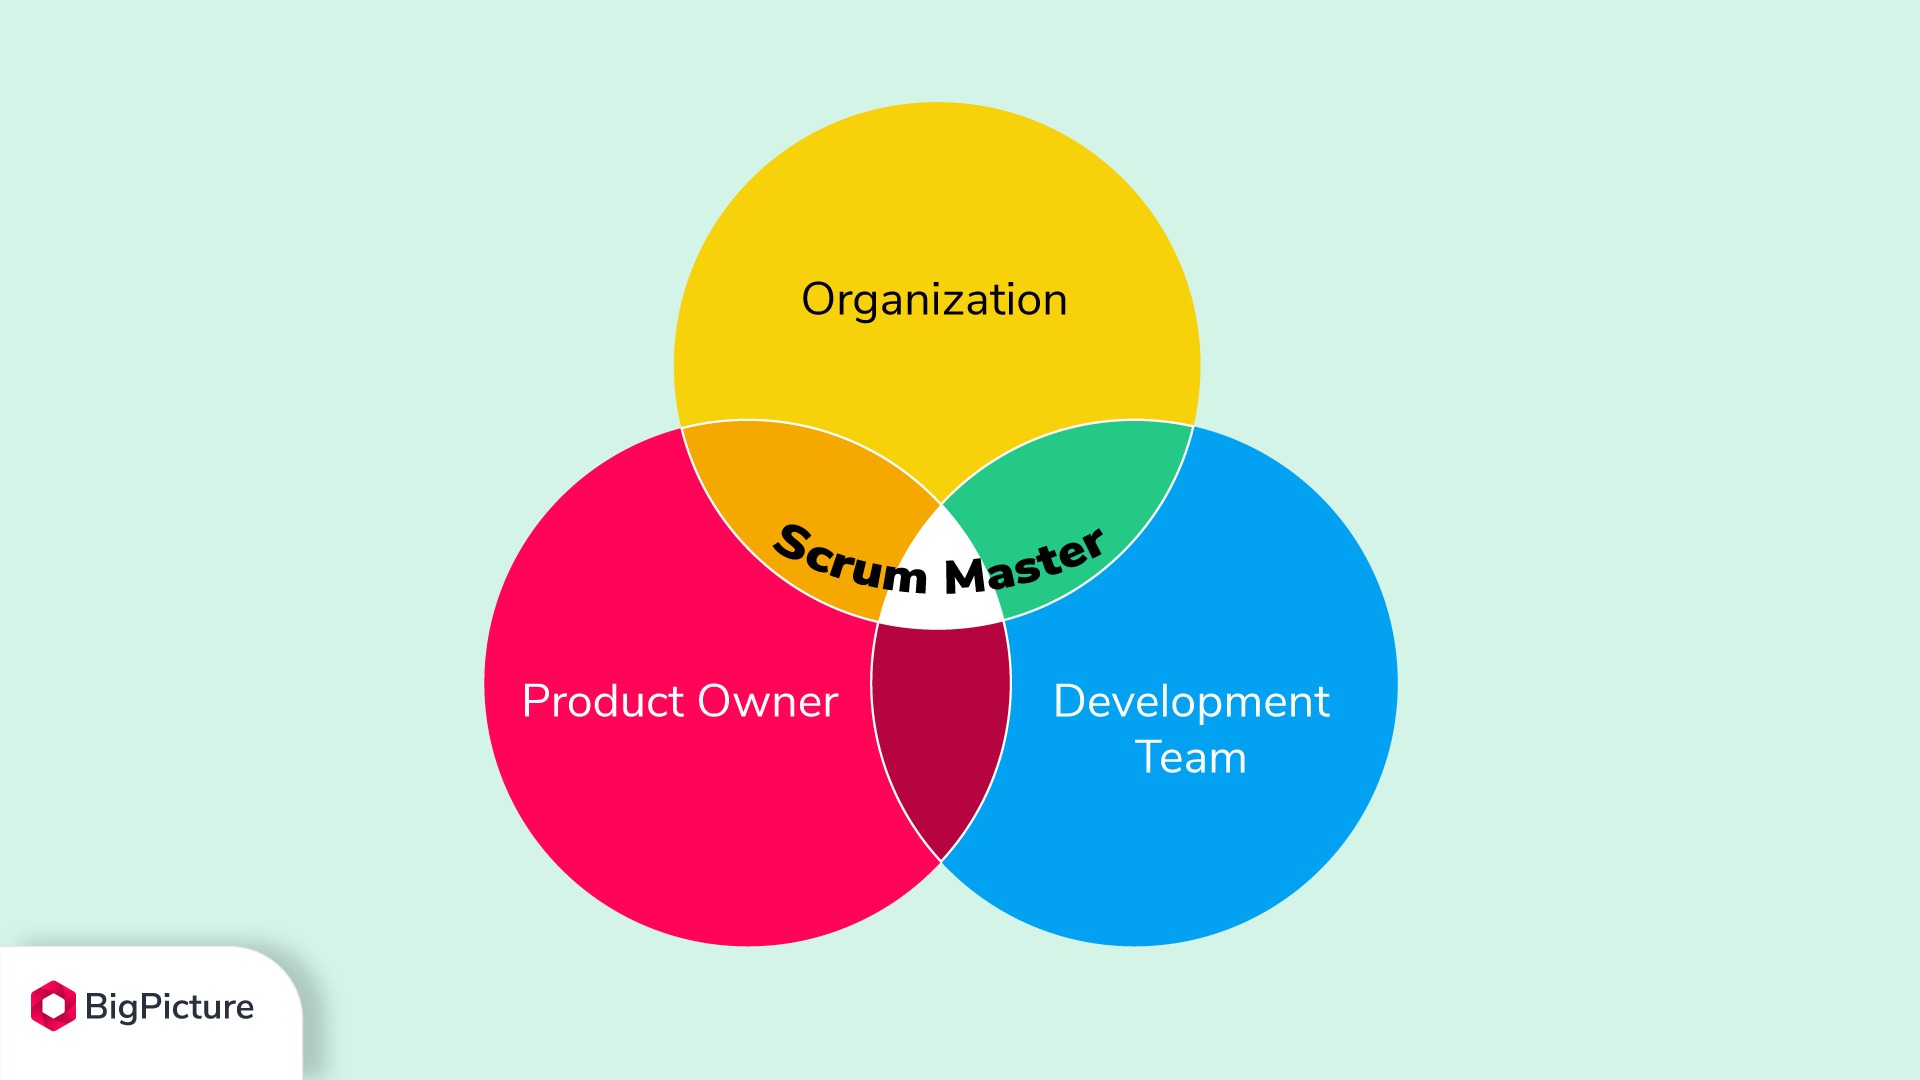 A Venn's diagram showing that the scrum master is situated at the intersection of organization, product owner, and development team.